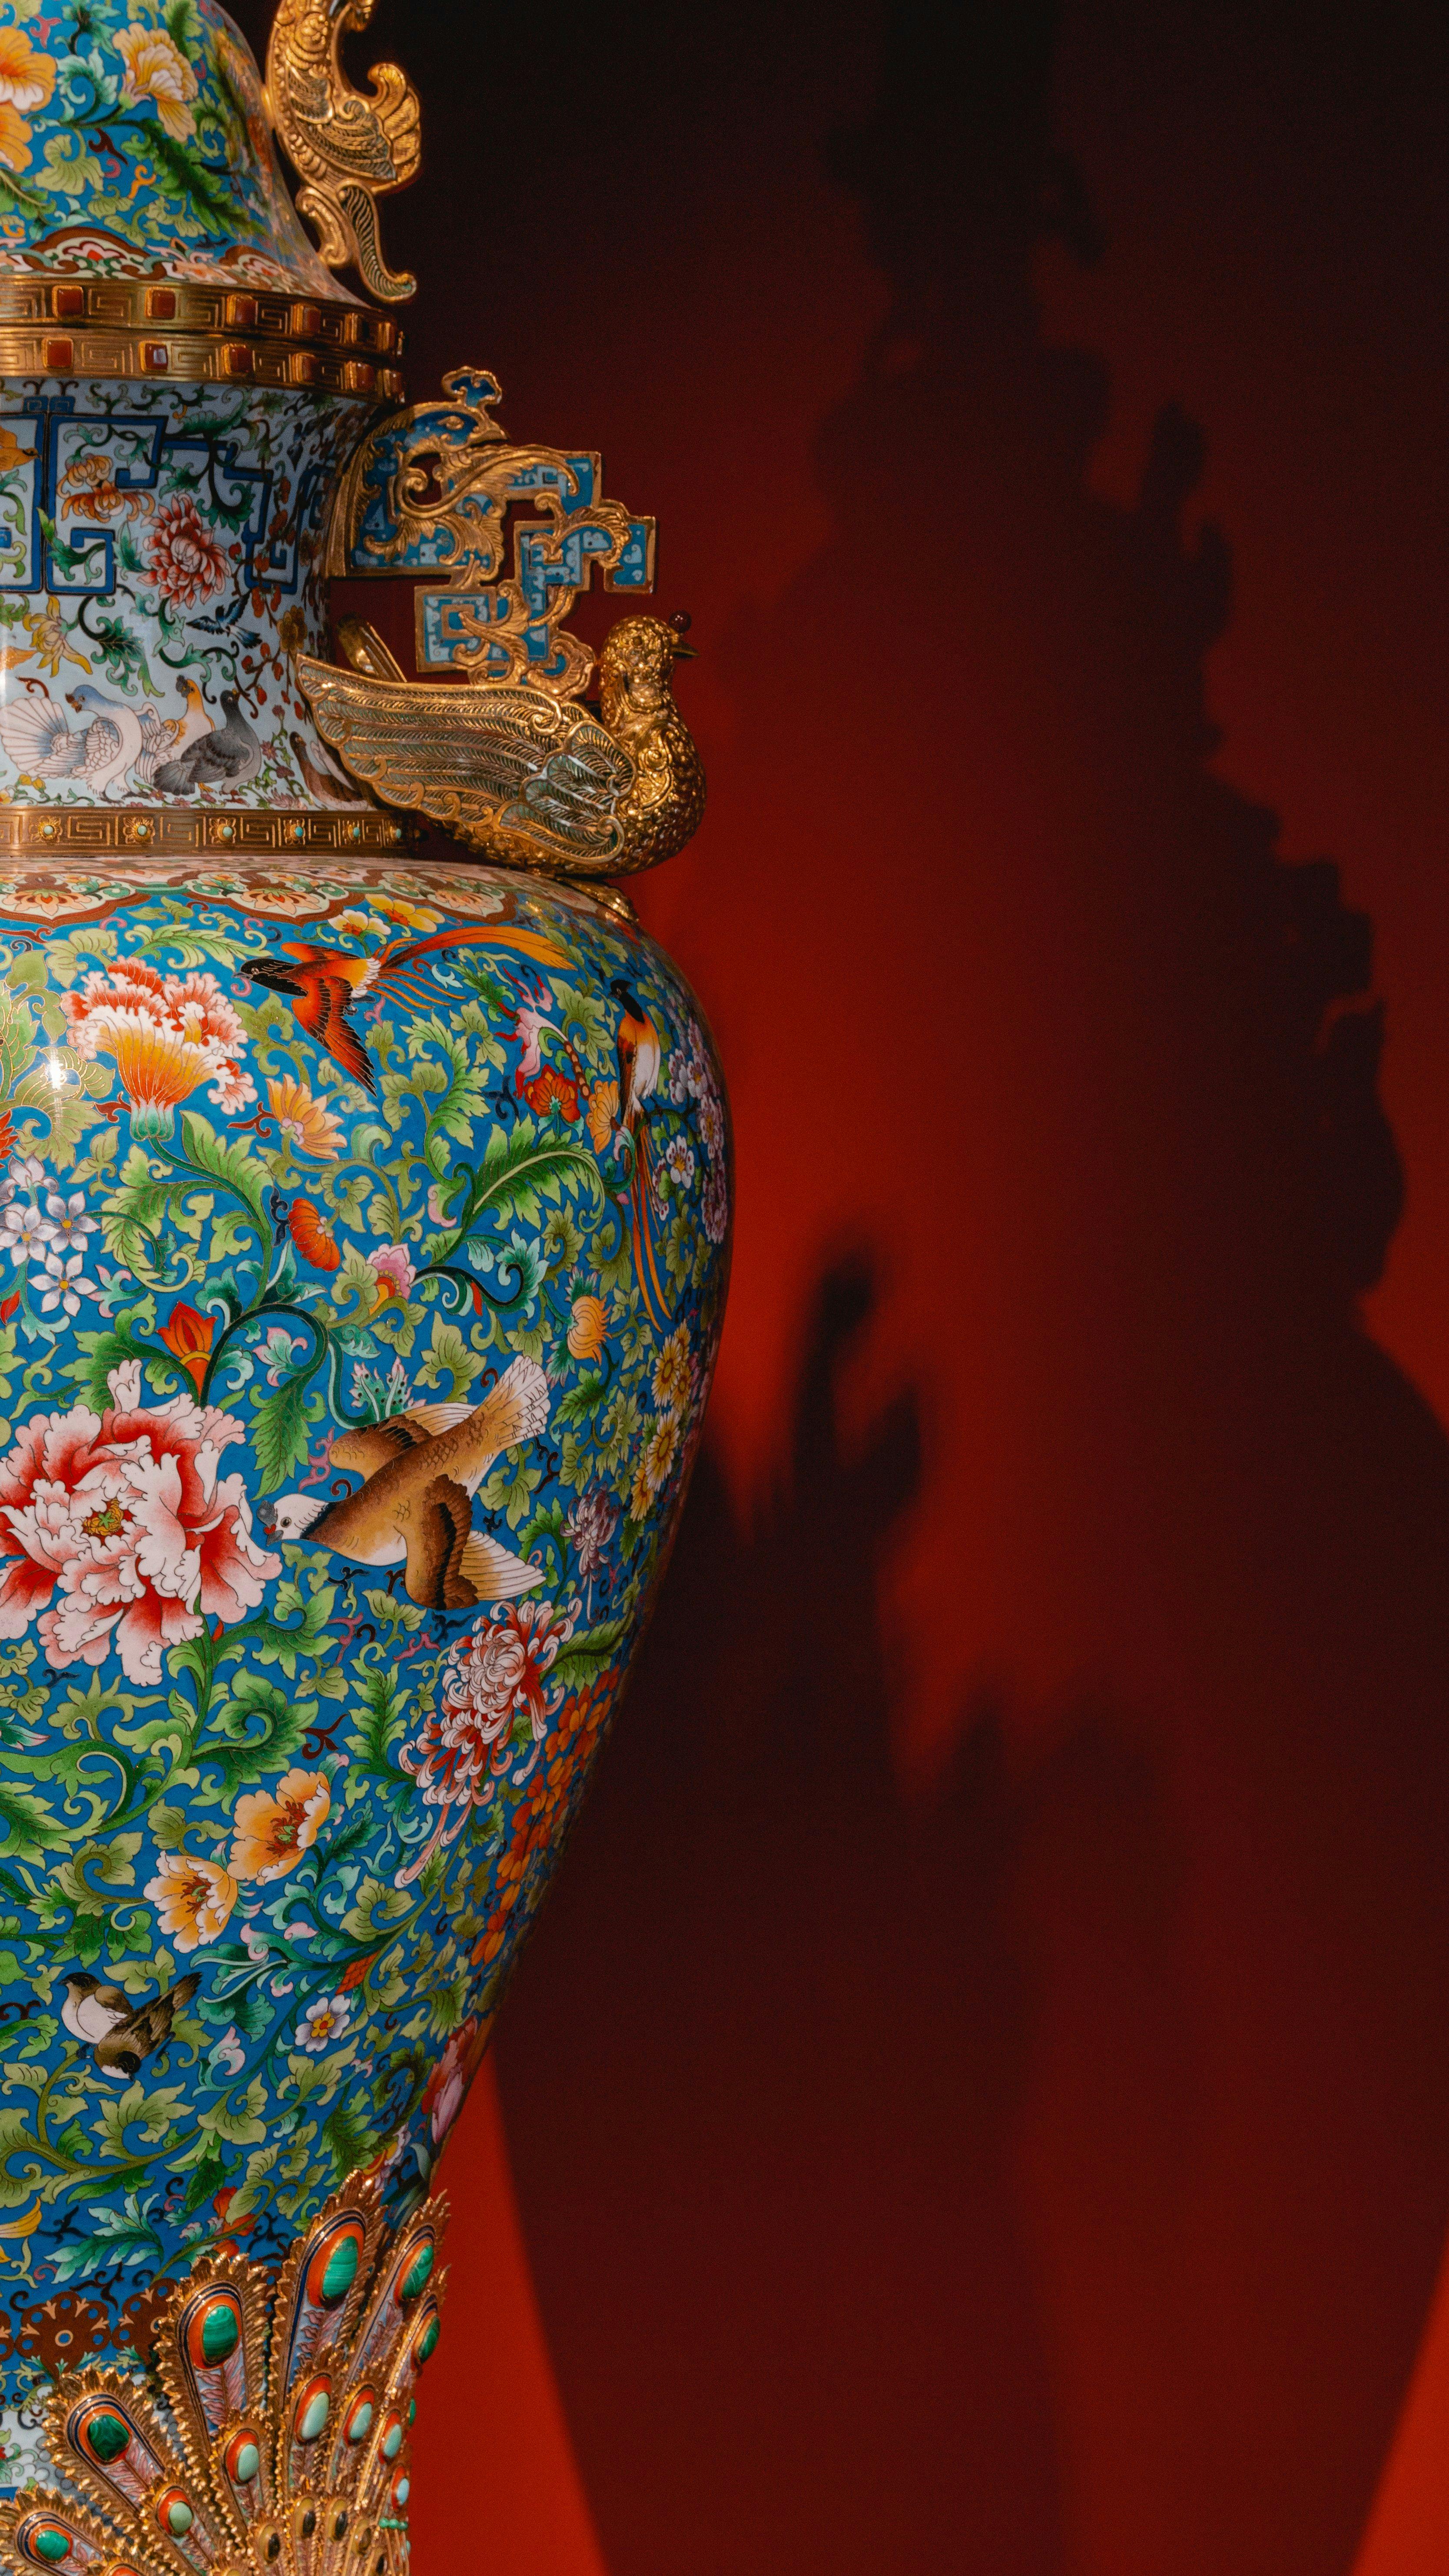 Decorated porcelain vase in China.